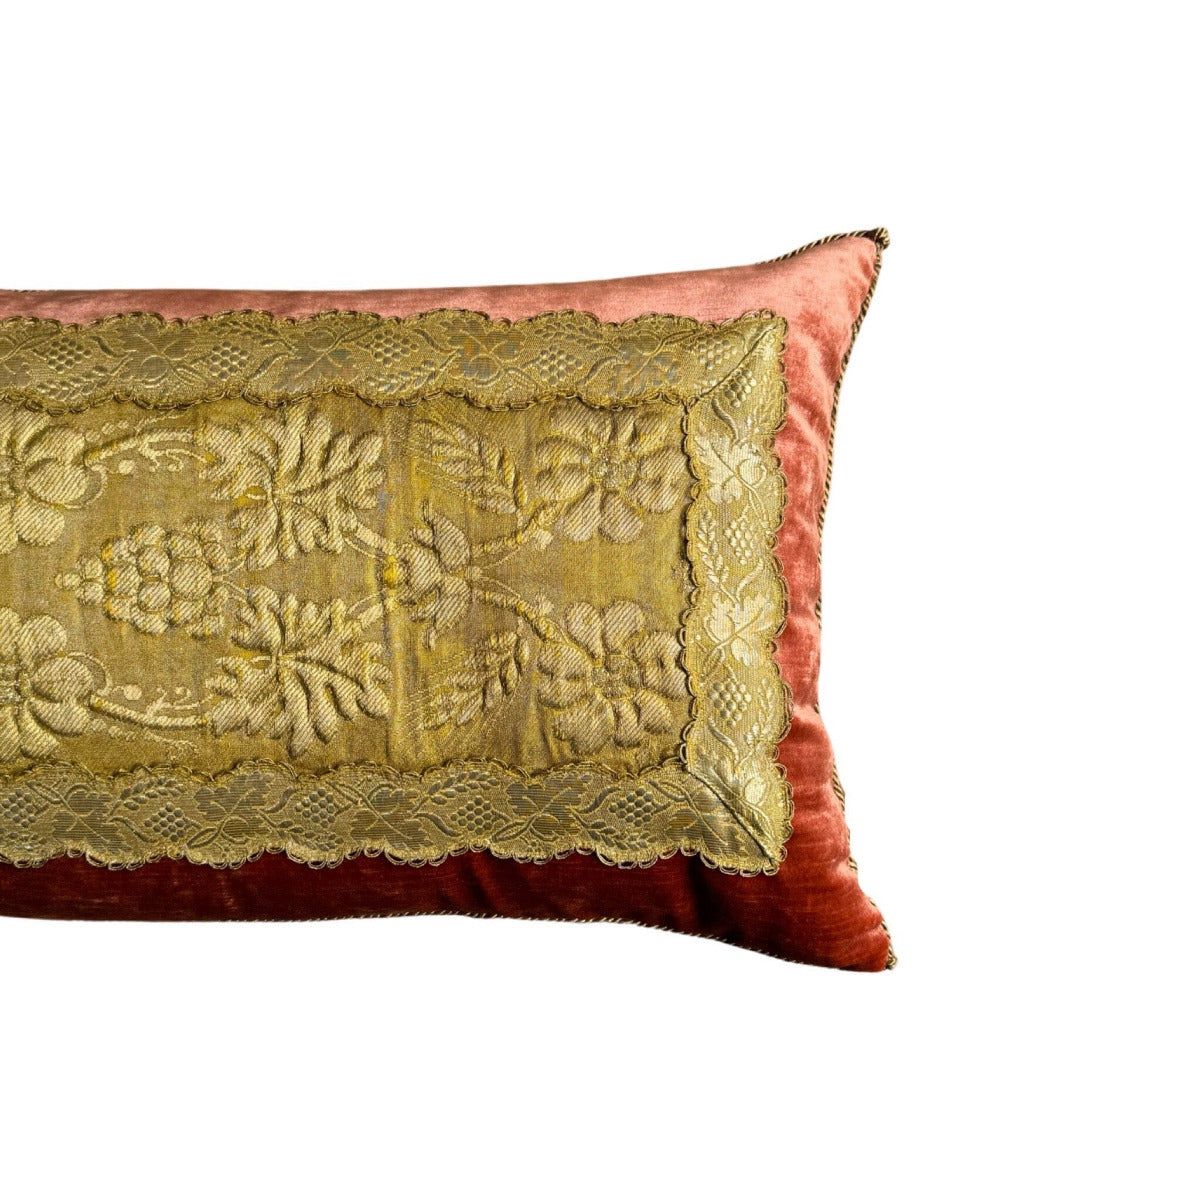 19th C. European Cloth of Gold with Raised Gold Metallic Embroidery (#M111523 | 15 x 31